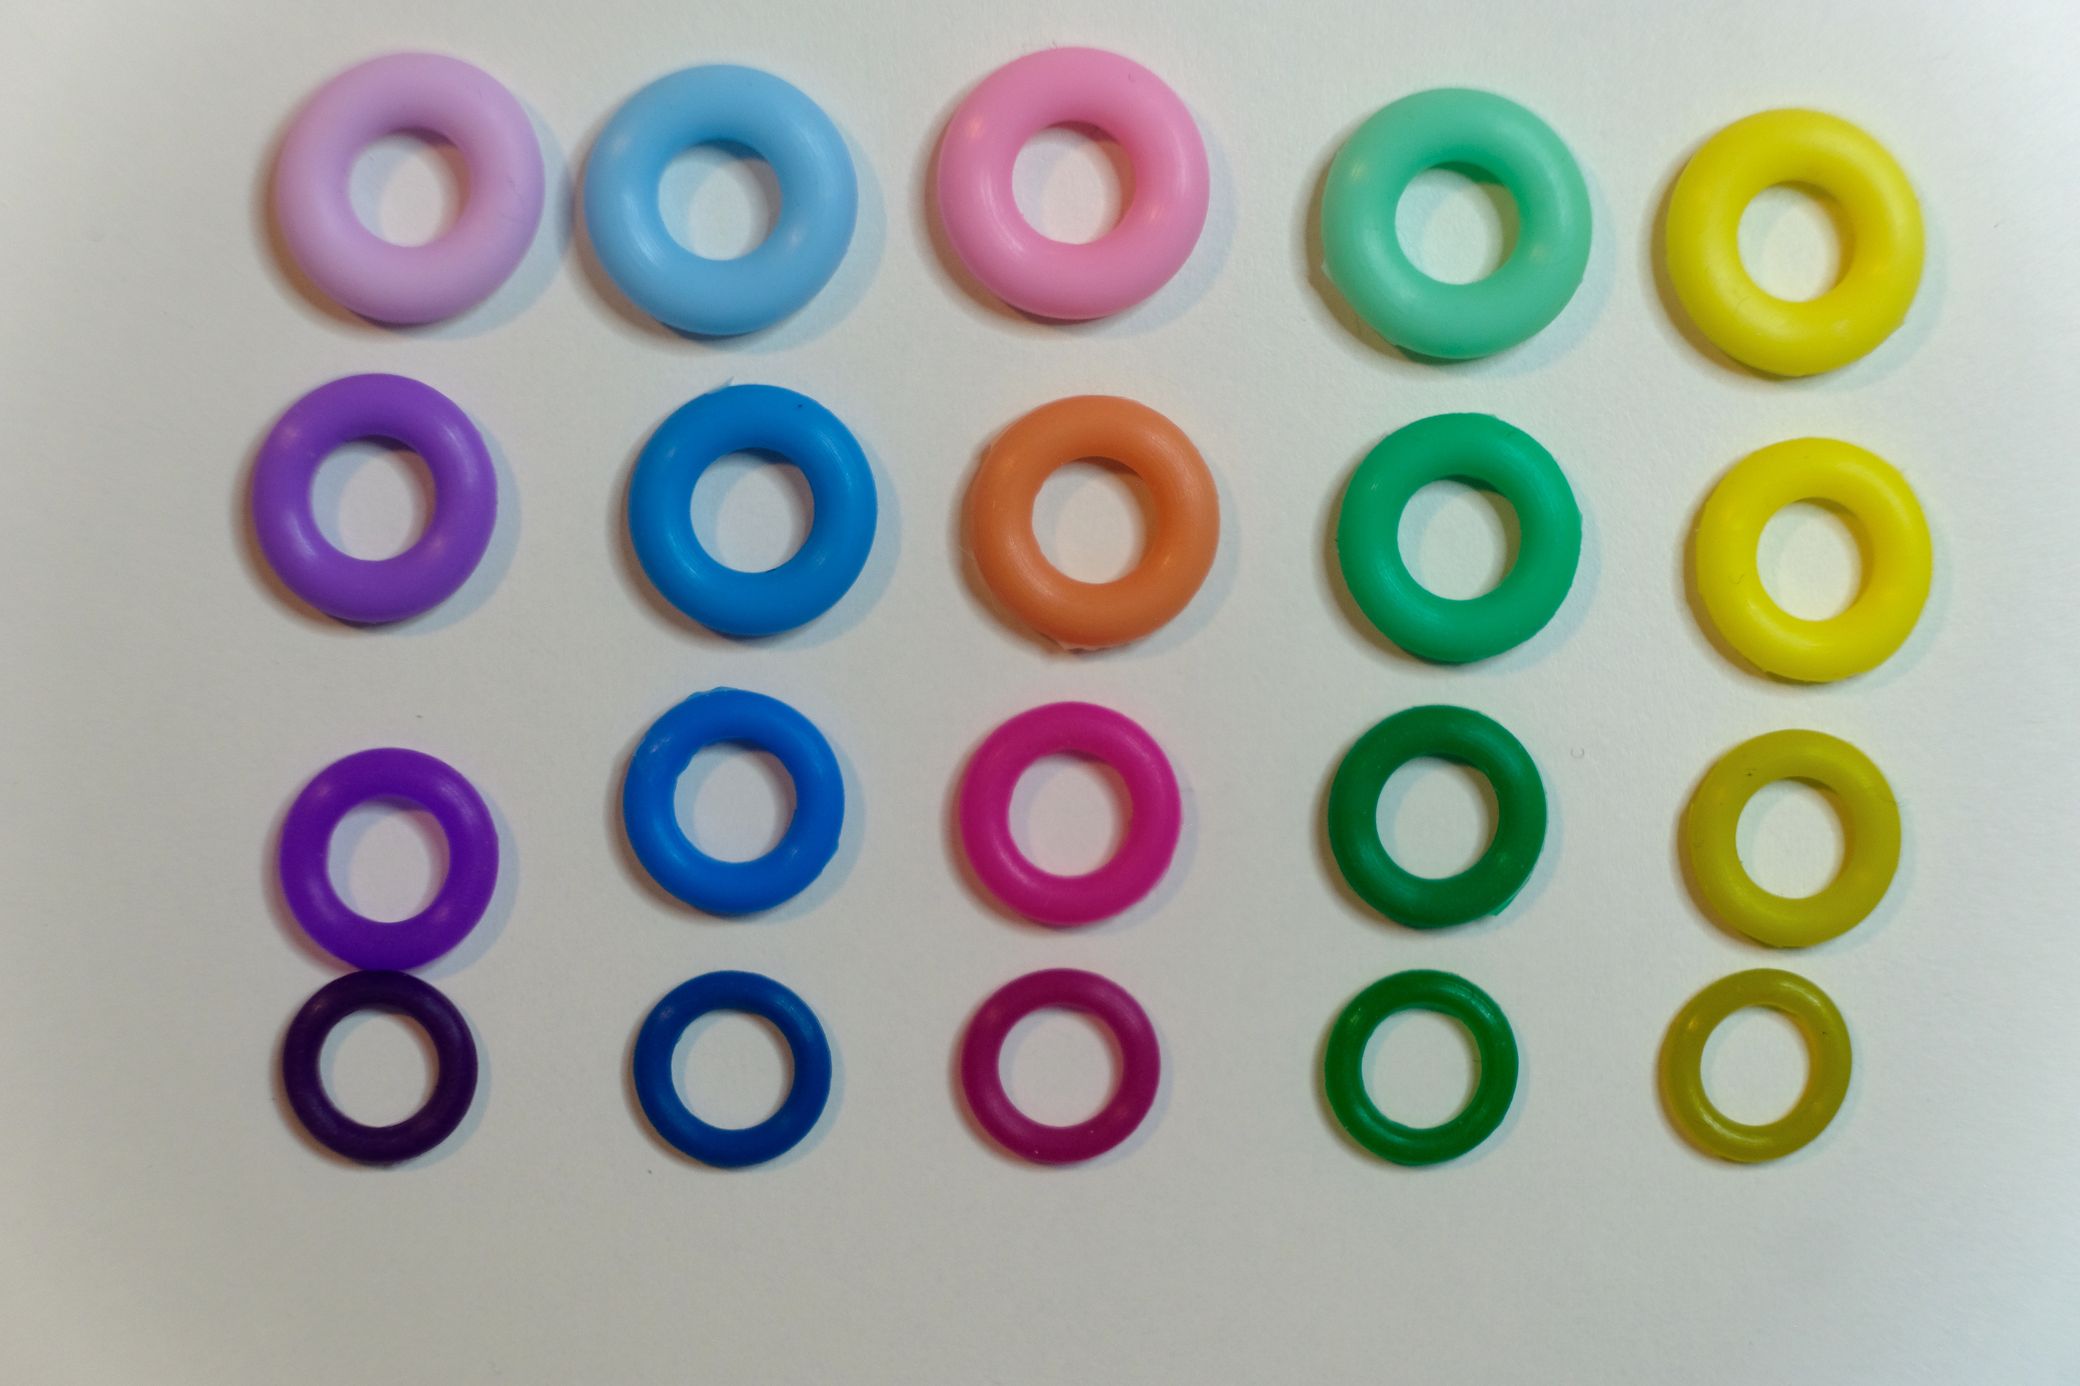 All the o-rings